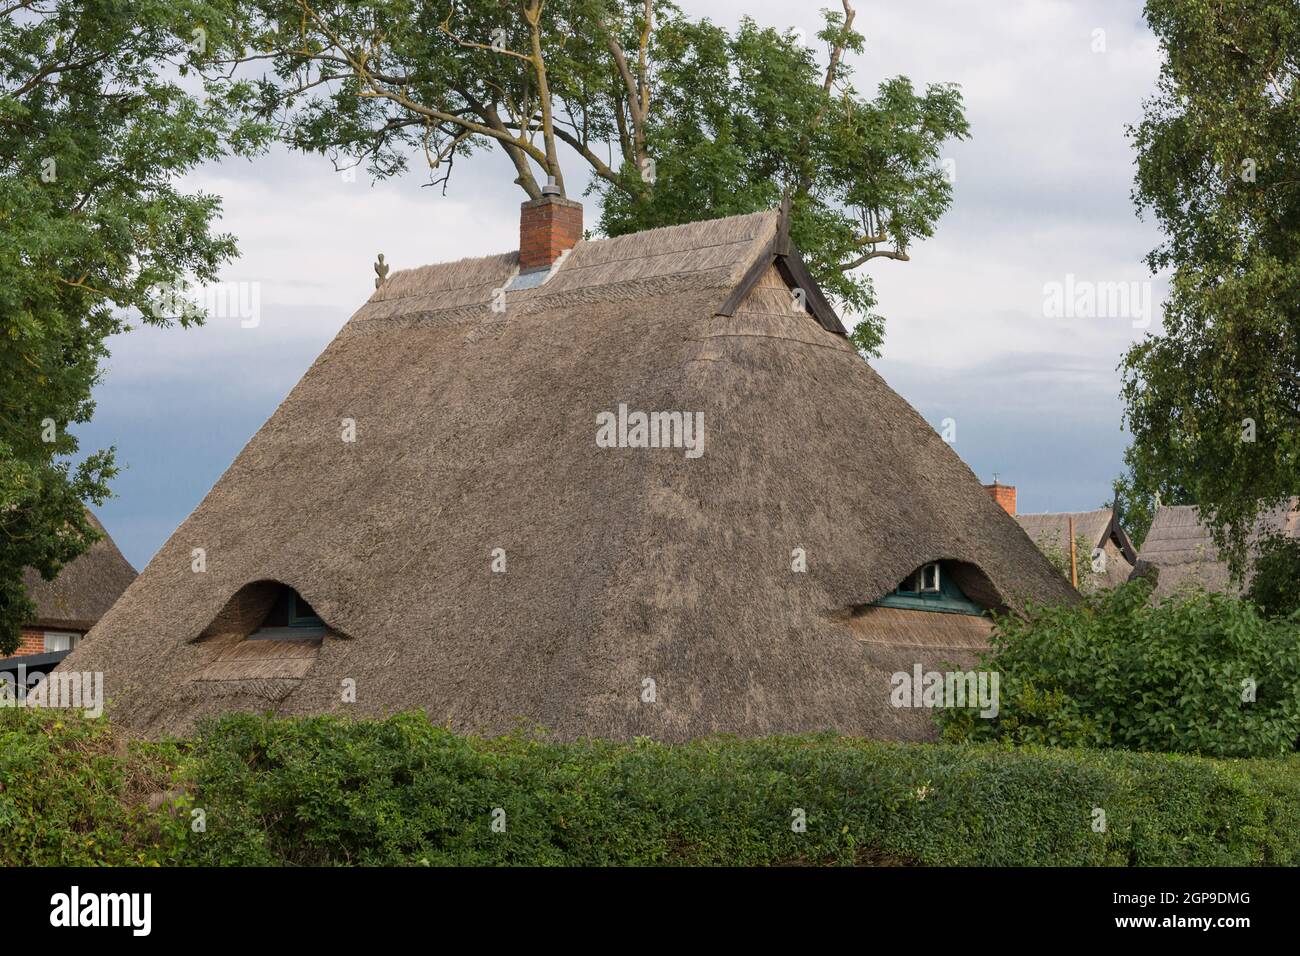 Houses on the Fischland-Darß with a thatched roof Stock Photo